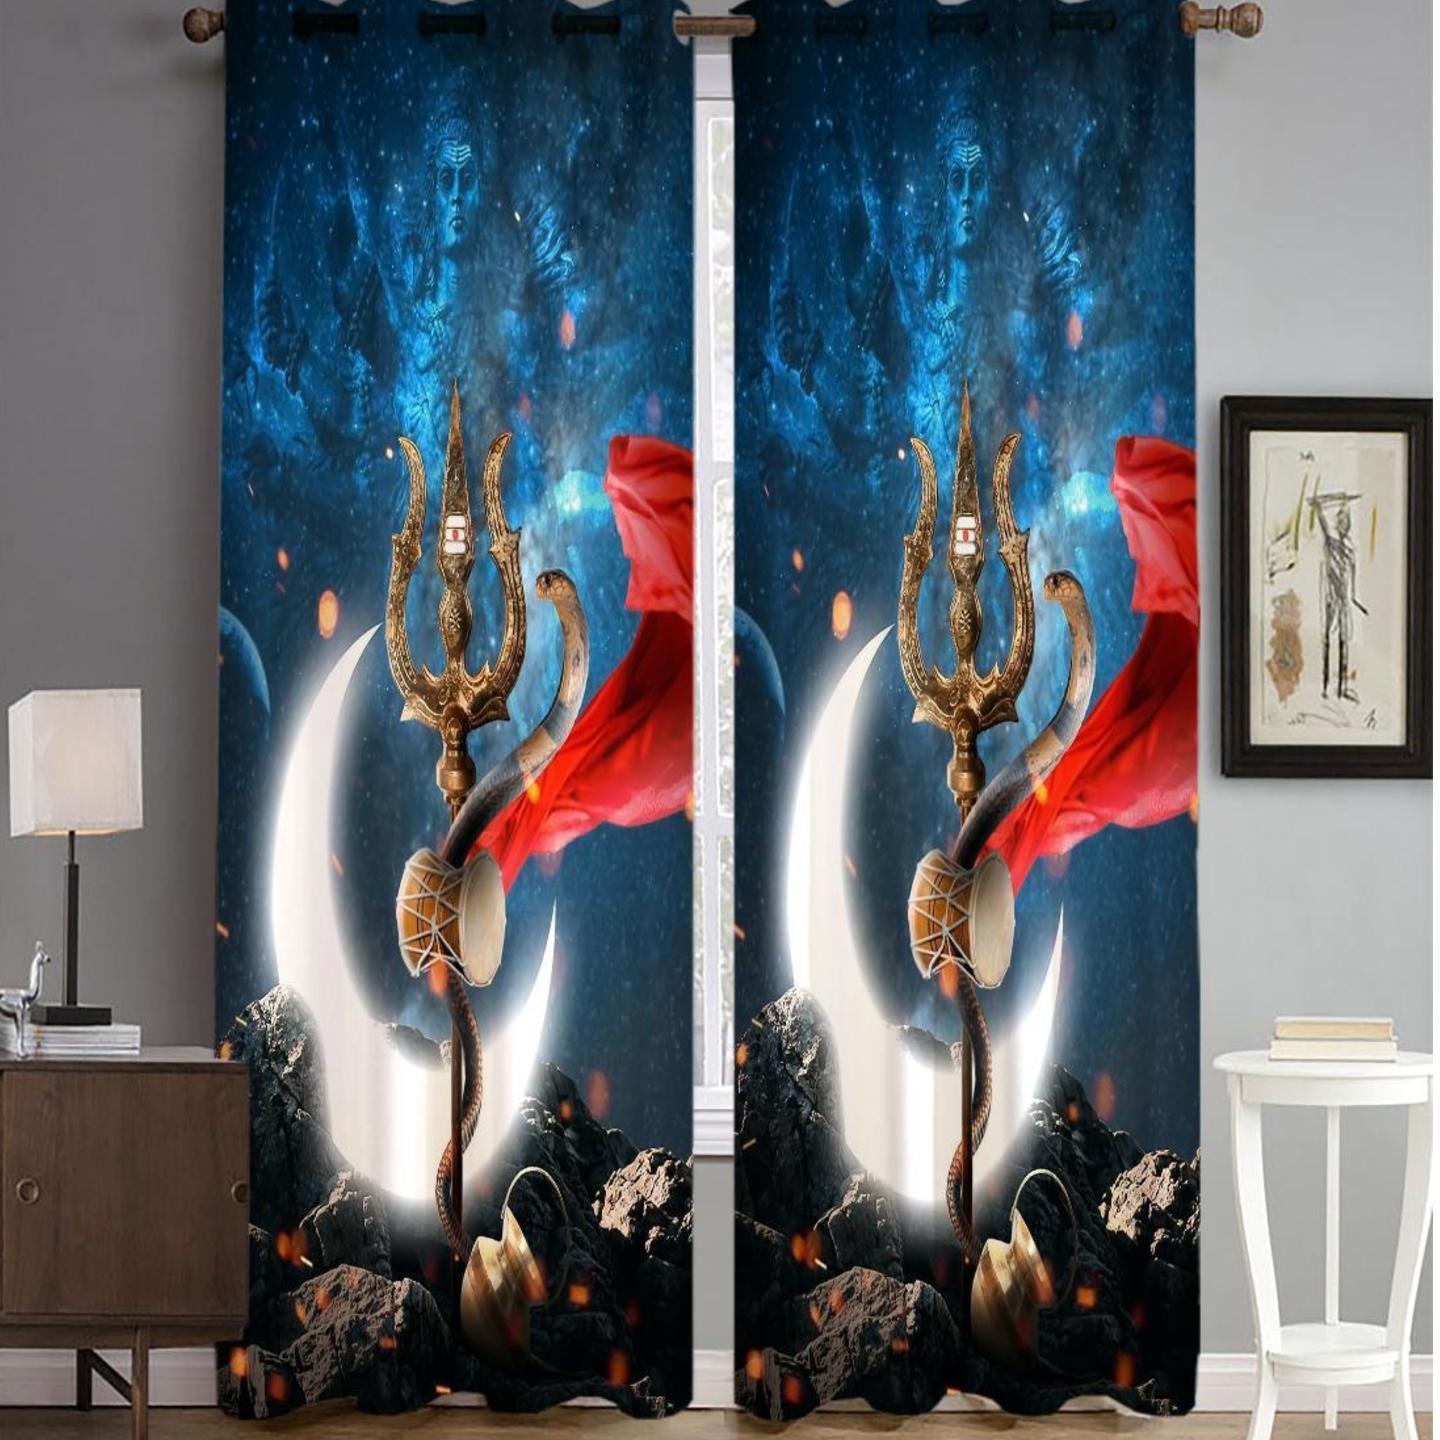 Handtex Home Digital Printed Curtain 3D Themed Polyester Curtains for Home Decor  Eyelet Grommet Panels for Living Room Balcony Bedroom, 4 x 7 Feet,Set of 2pcs  Trishul